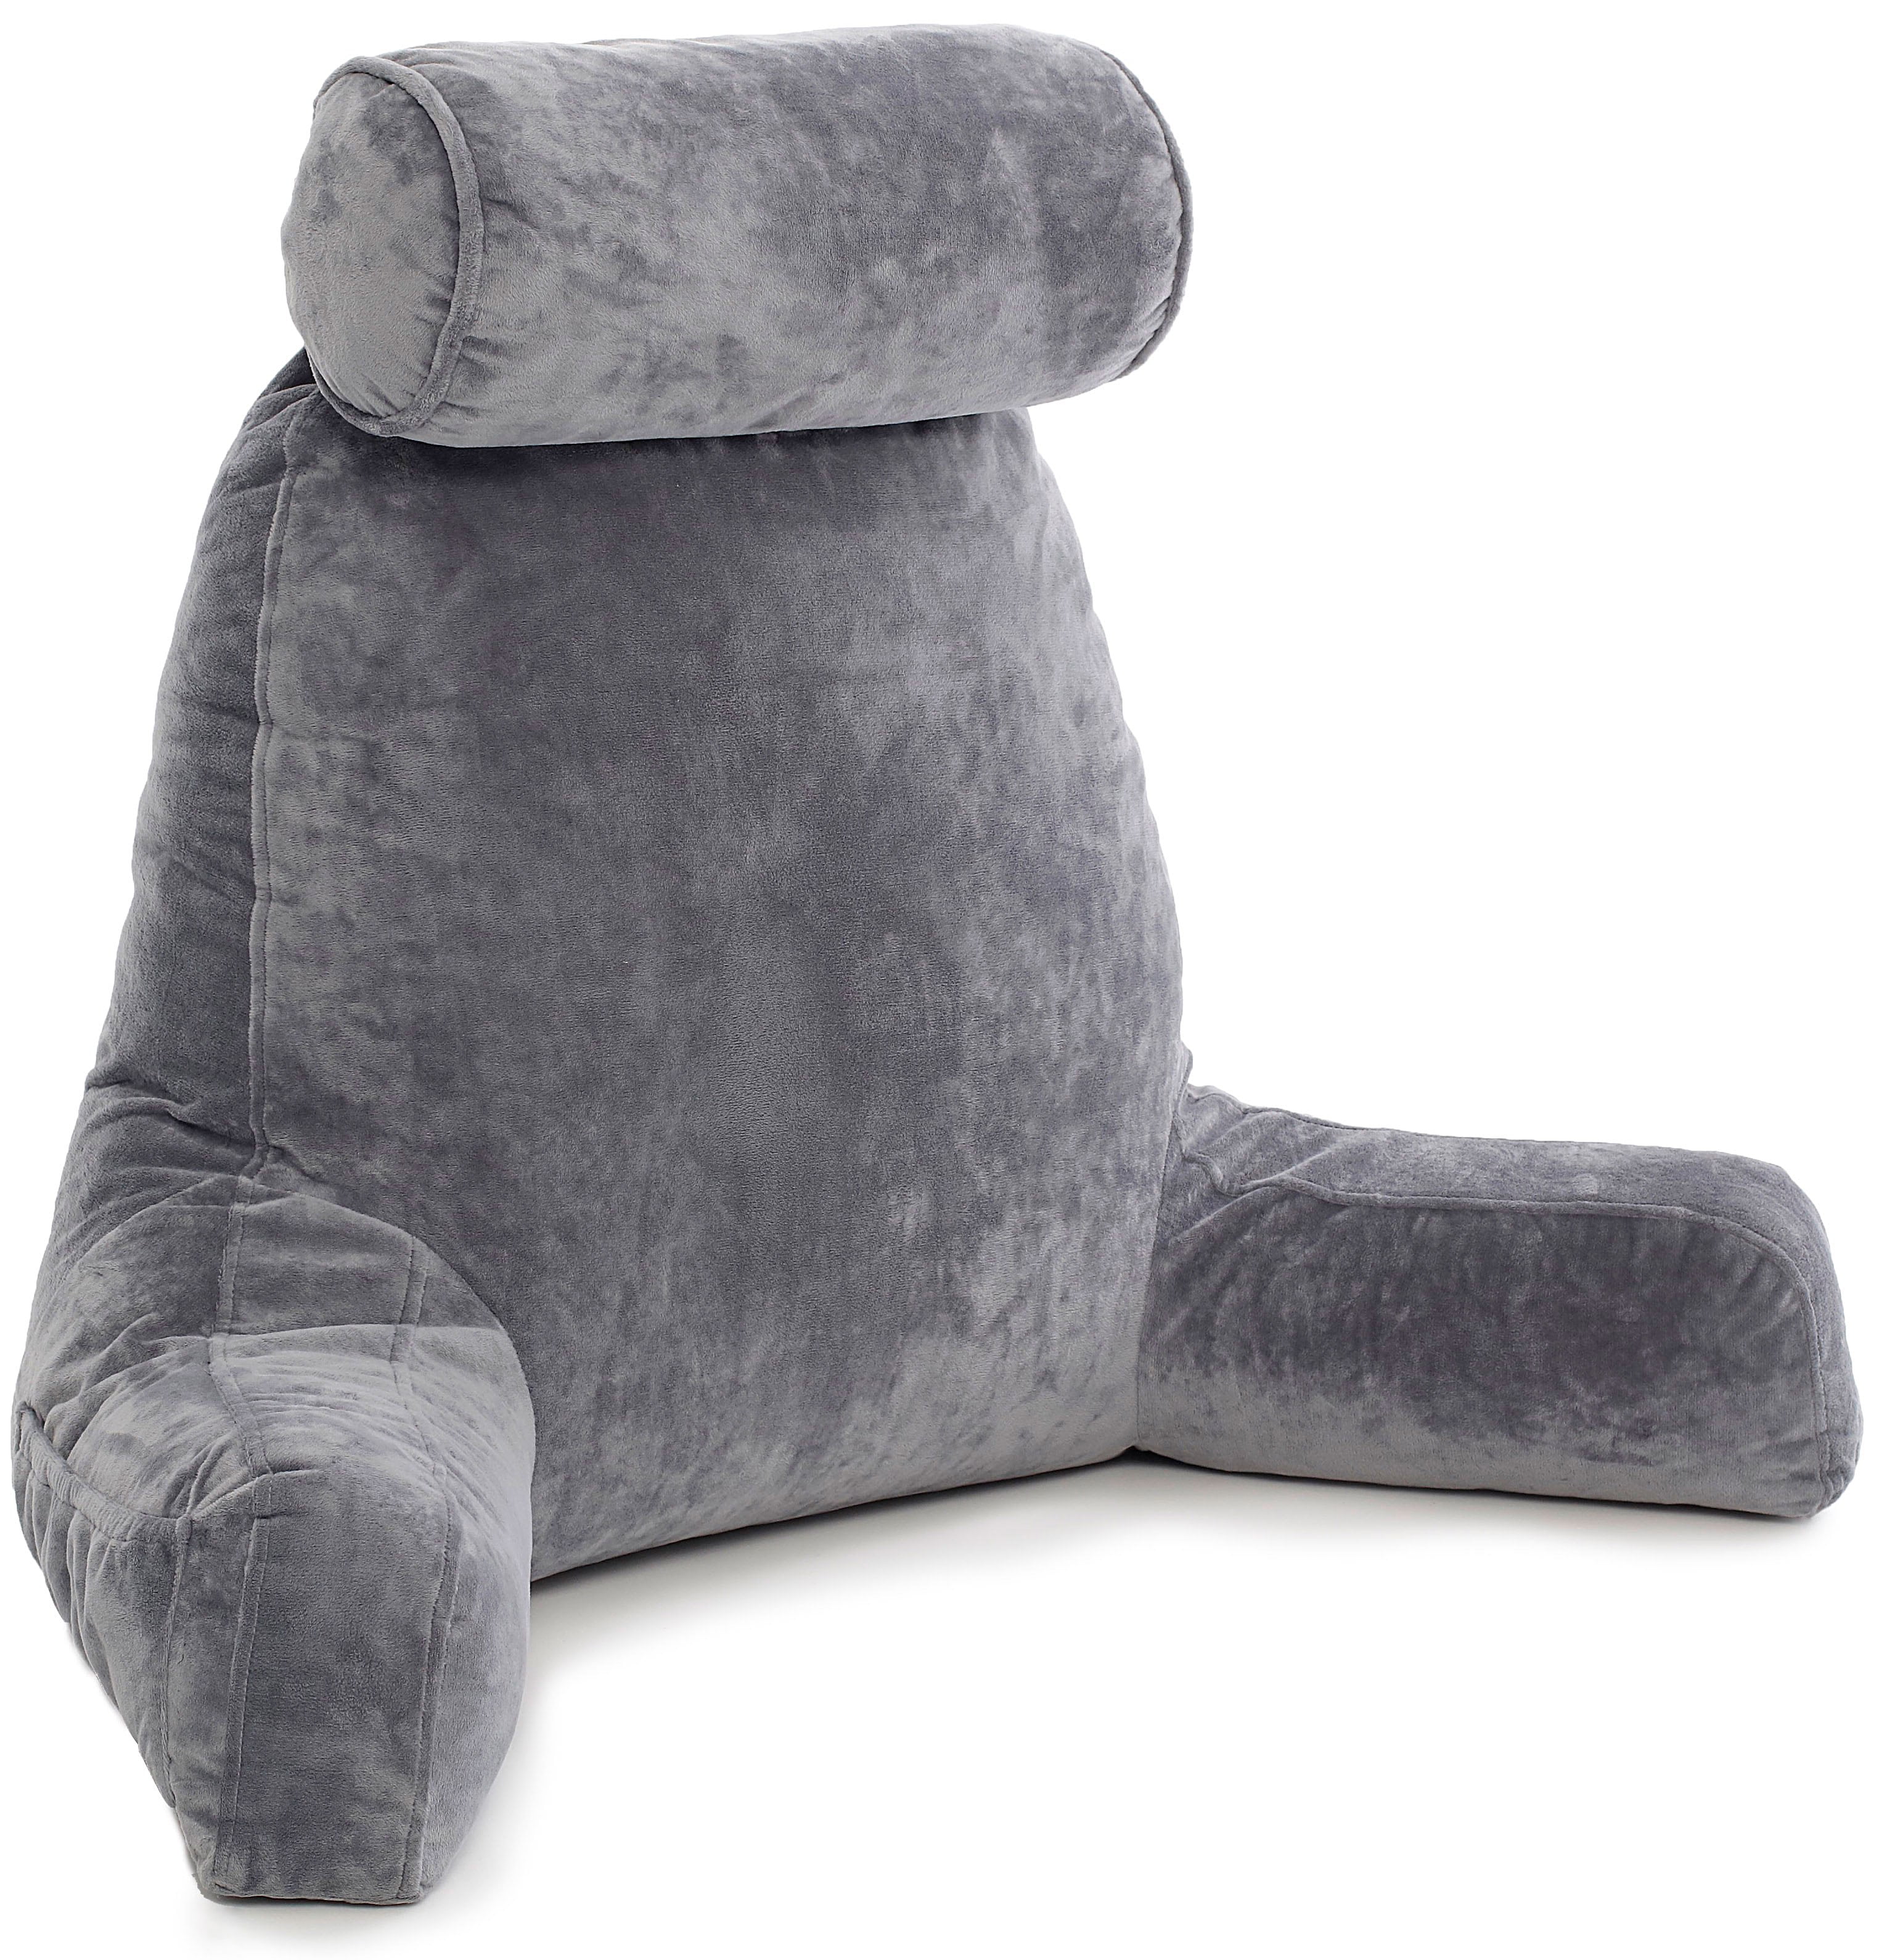 Large neck roll large pillow in beautiful design